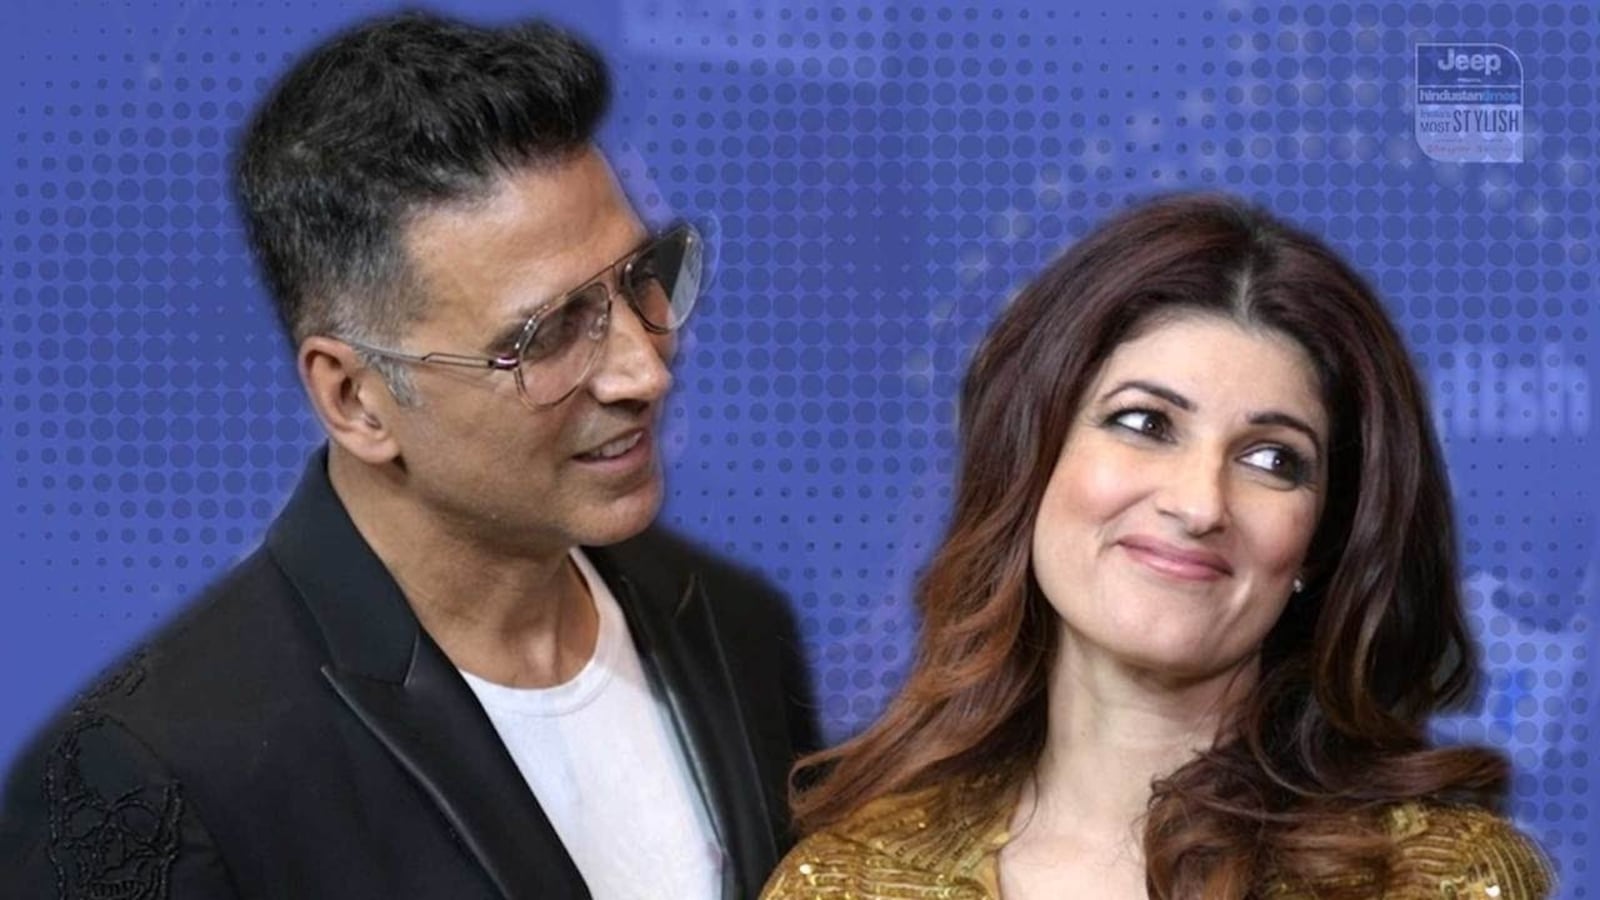 Twinkle Khanna Ki Sexy Video Hd Free - Twinkle Khanna gets advice on 'what not to write' by Akshay: 'I touch her  feet' | Web Series - Hindustan Times